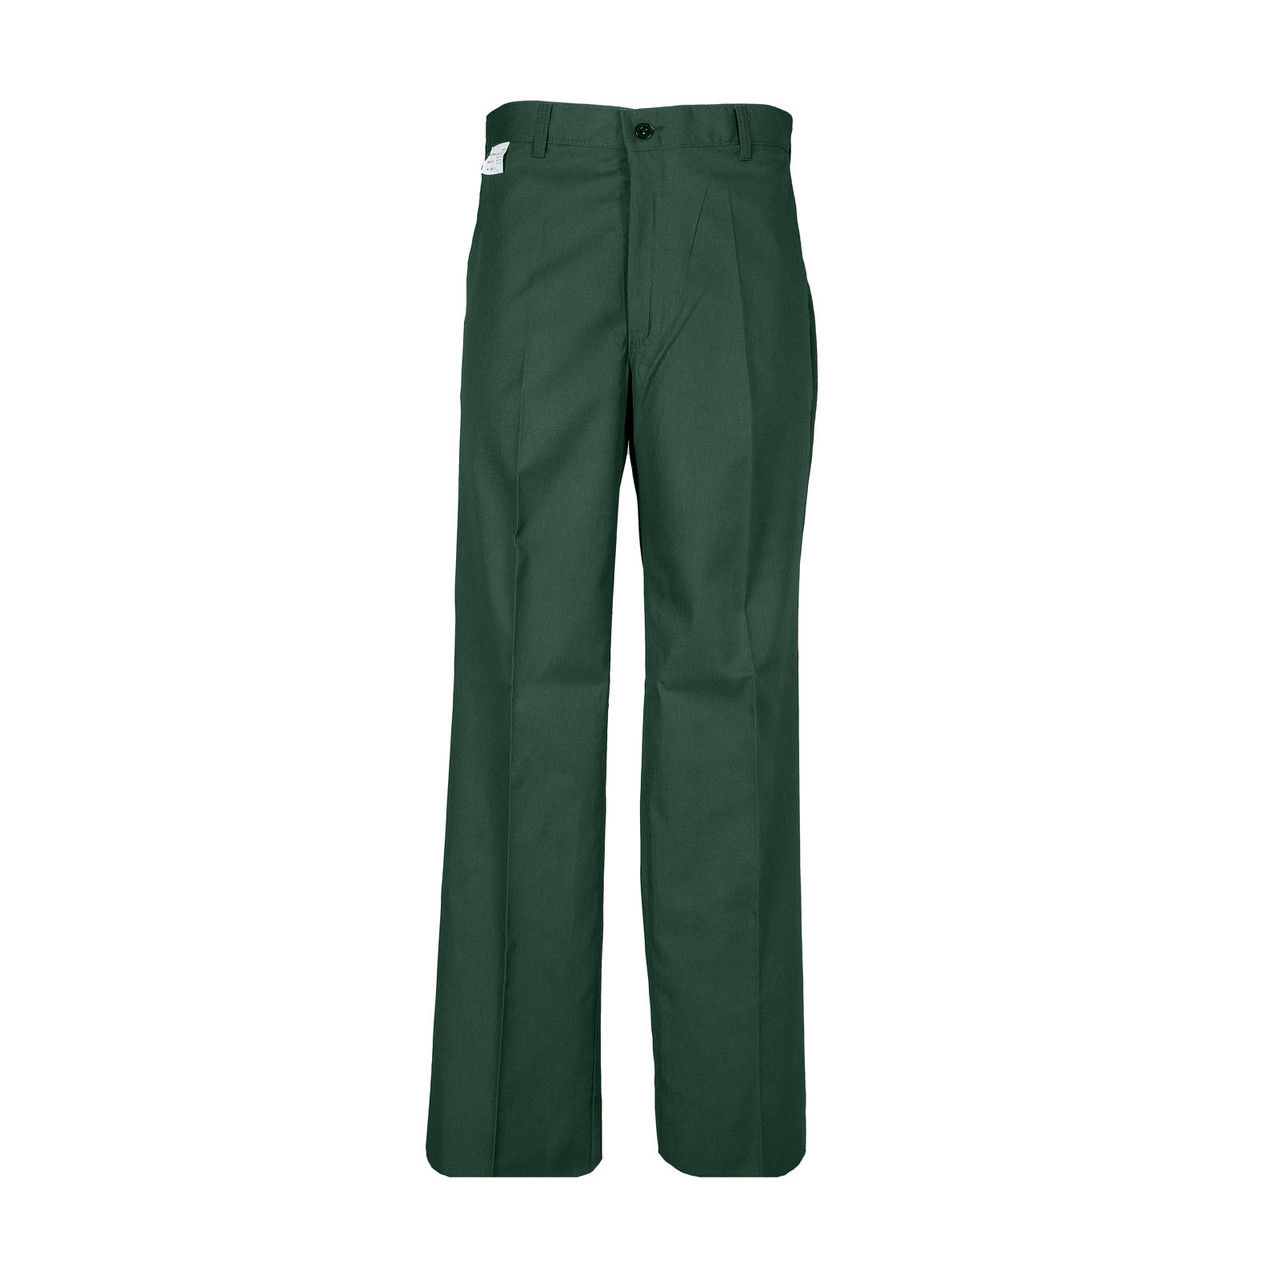 What goes well with these green work pants?